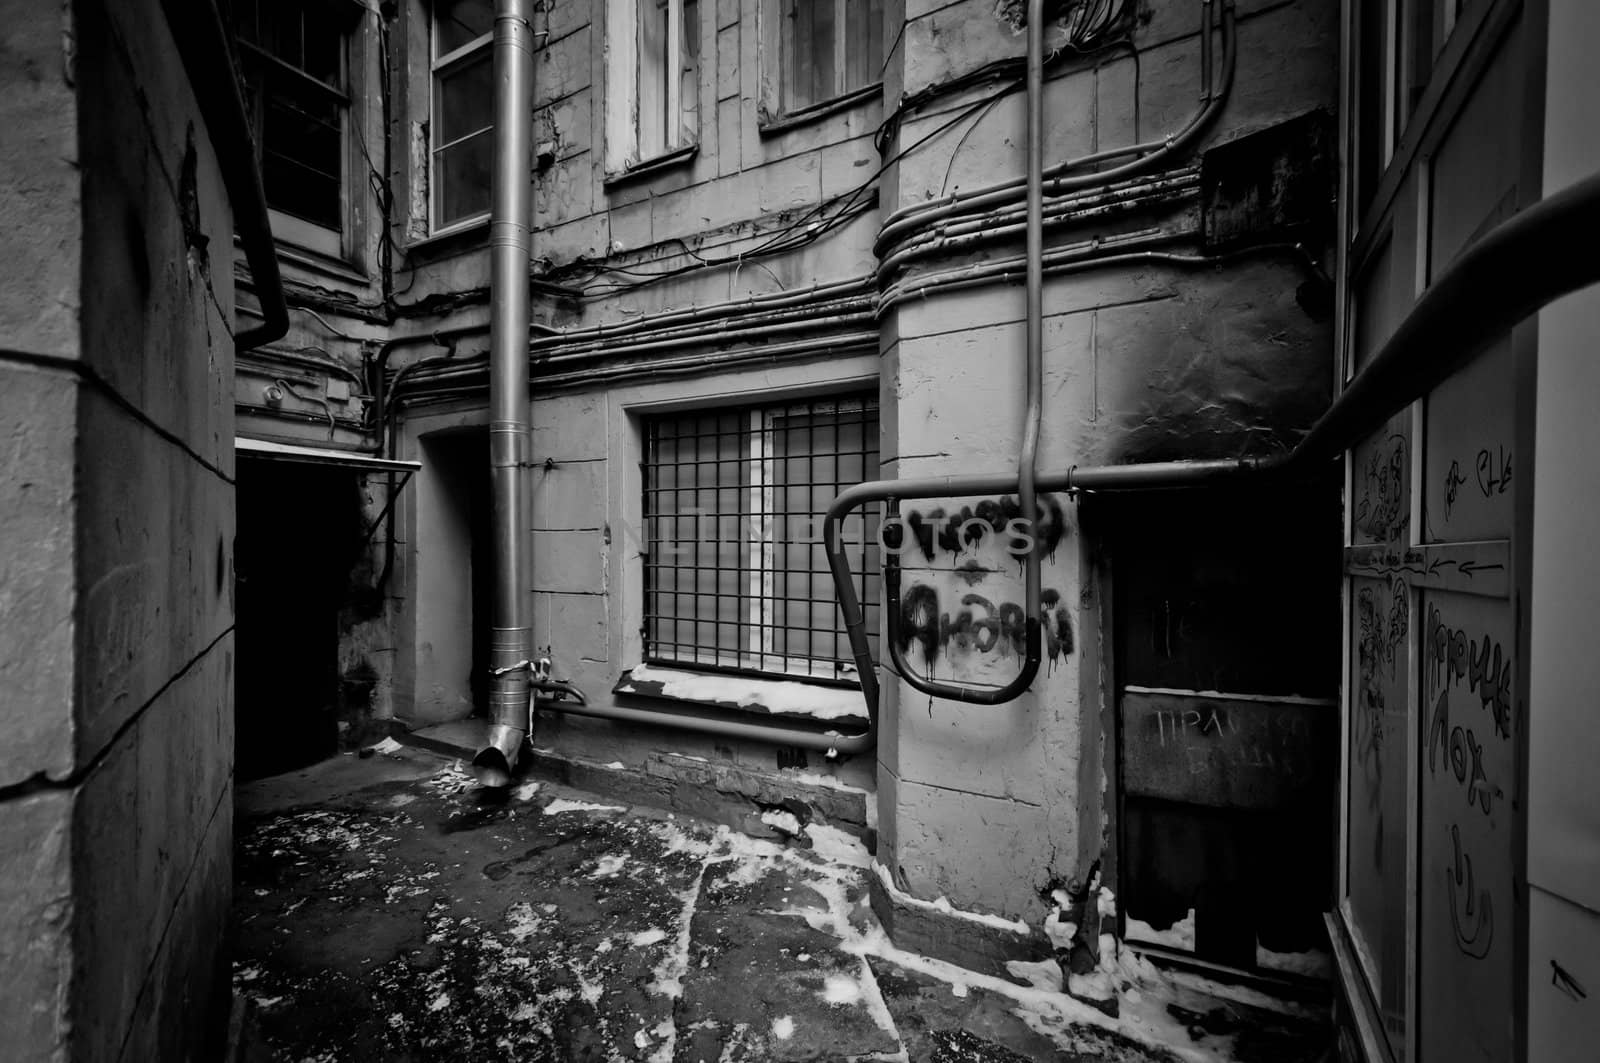 Ugly and abandoned porch in black and white